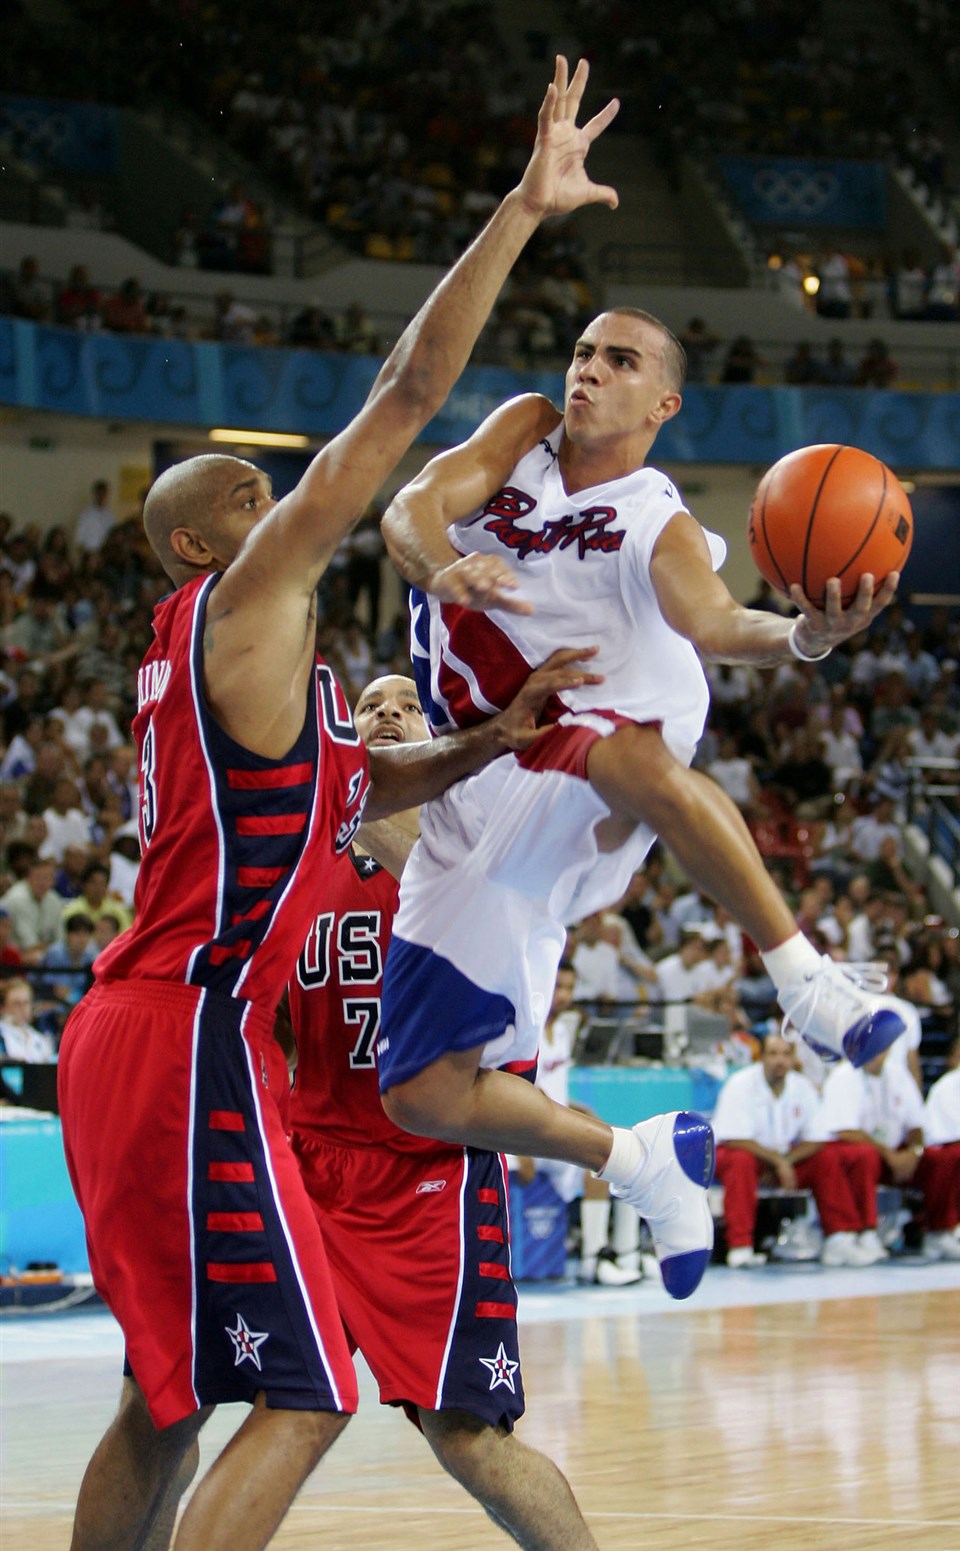 Basketball - Athens Olympic Games 2004 - Men's Preliminary Round